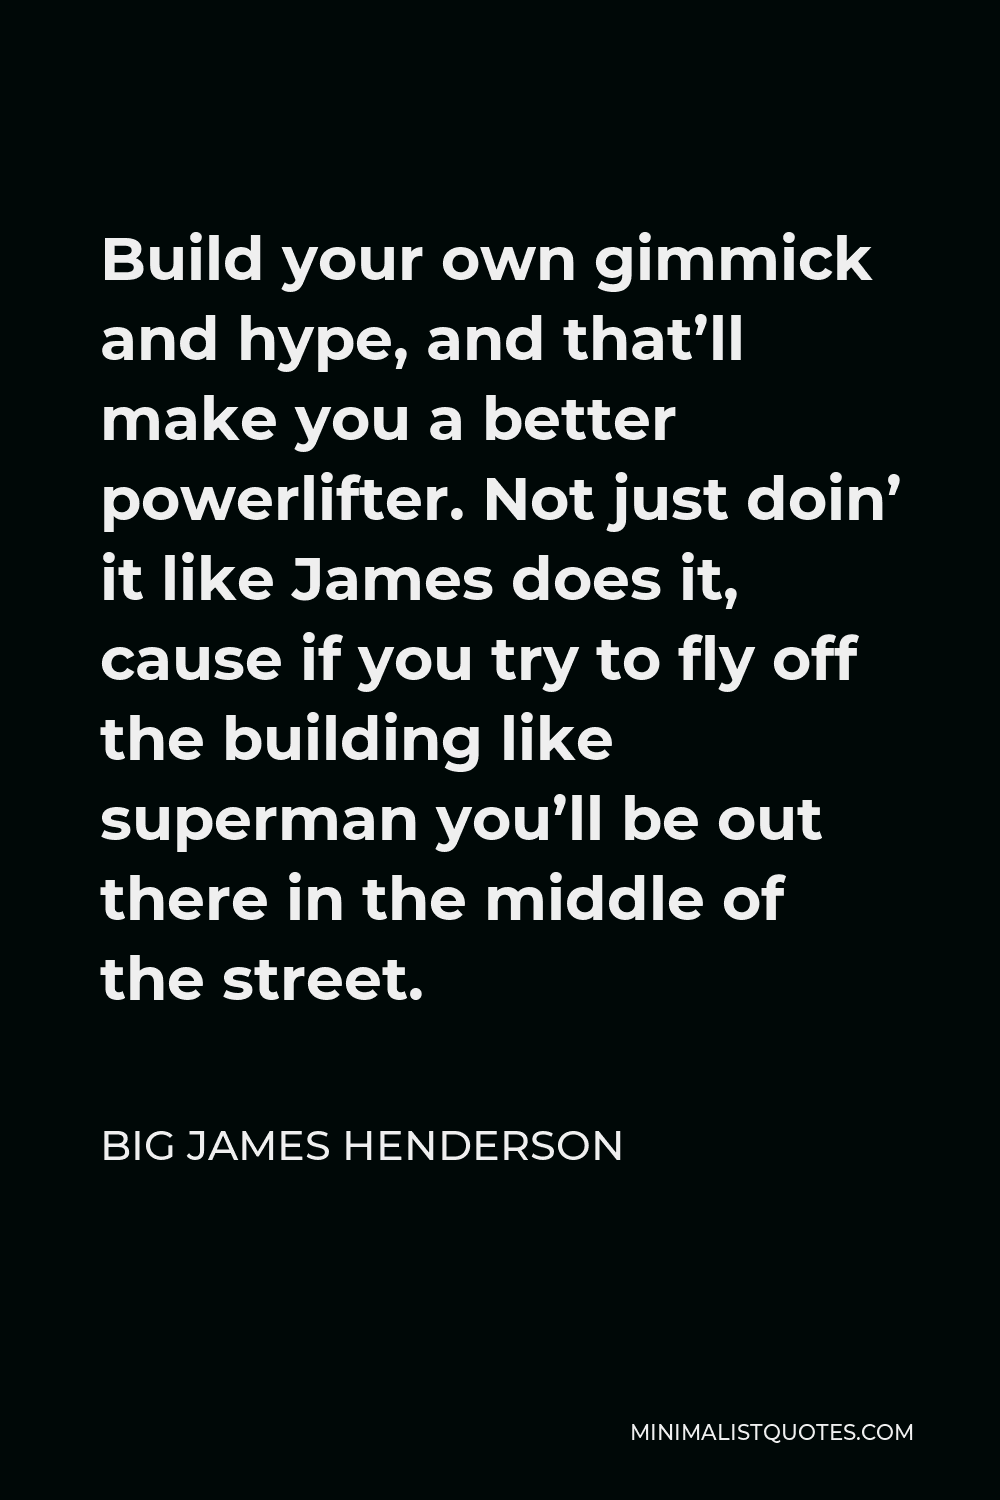 Big James Henderson Quote - Build your own gimmick and hype, and that’ll make you a better powerlifter. Not just doin’ it like James does it, cause if you try to fly off the building like superman you’ll be out there in the middle of the street.